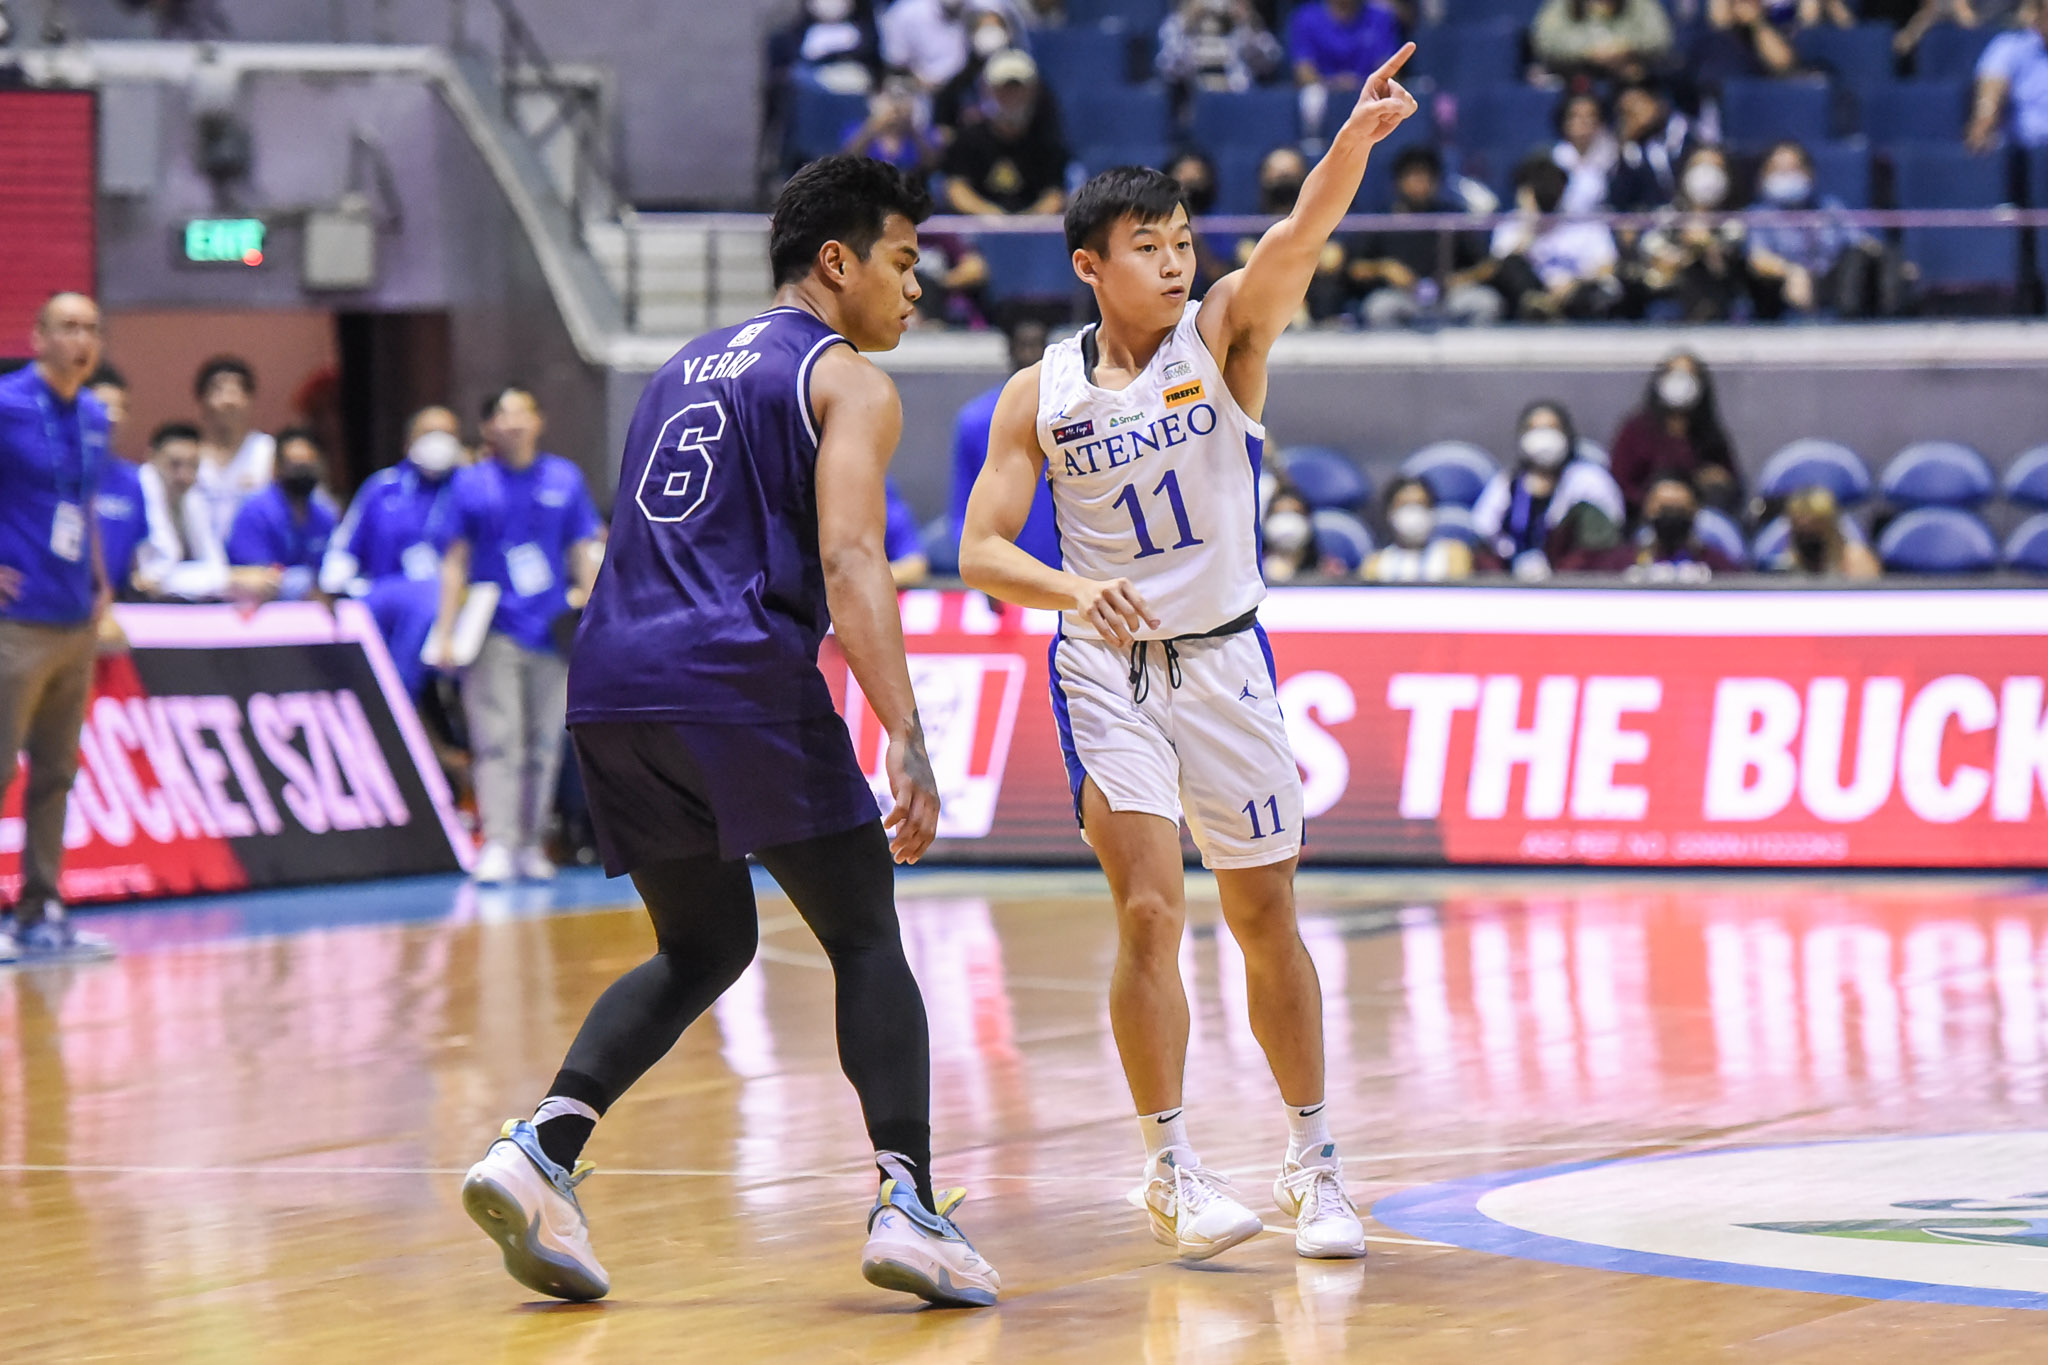 UAAP-85-MBB-AdU-vs-ADMU-Jacob-Lao Jacob Lao gives back to Ateneo by donating to coaches, scholar-athlete funds ADMU Basketball News UAAP  - philippine sports news